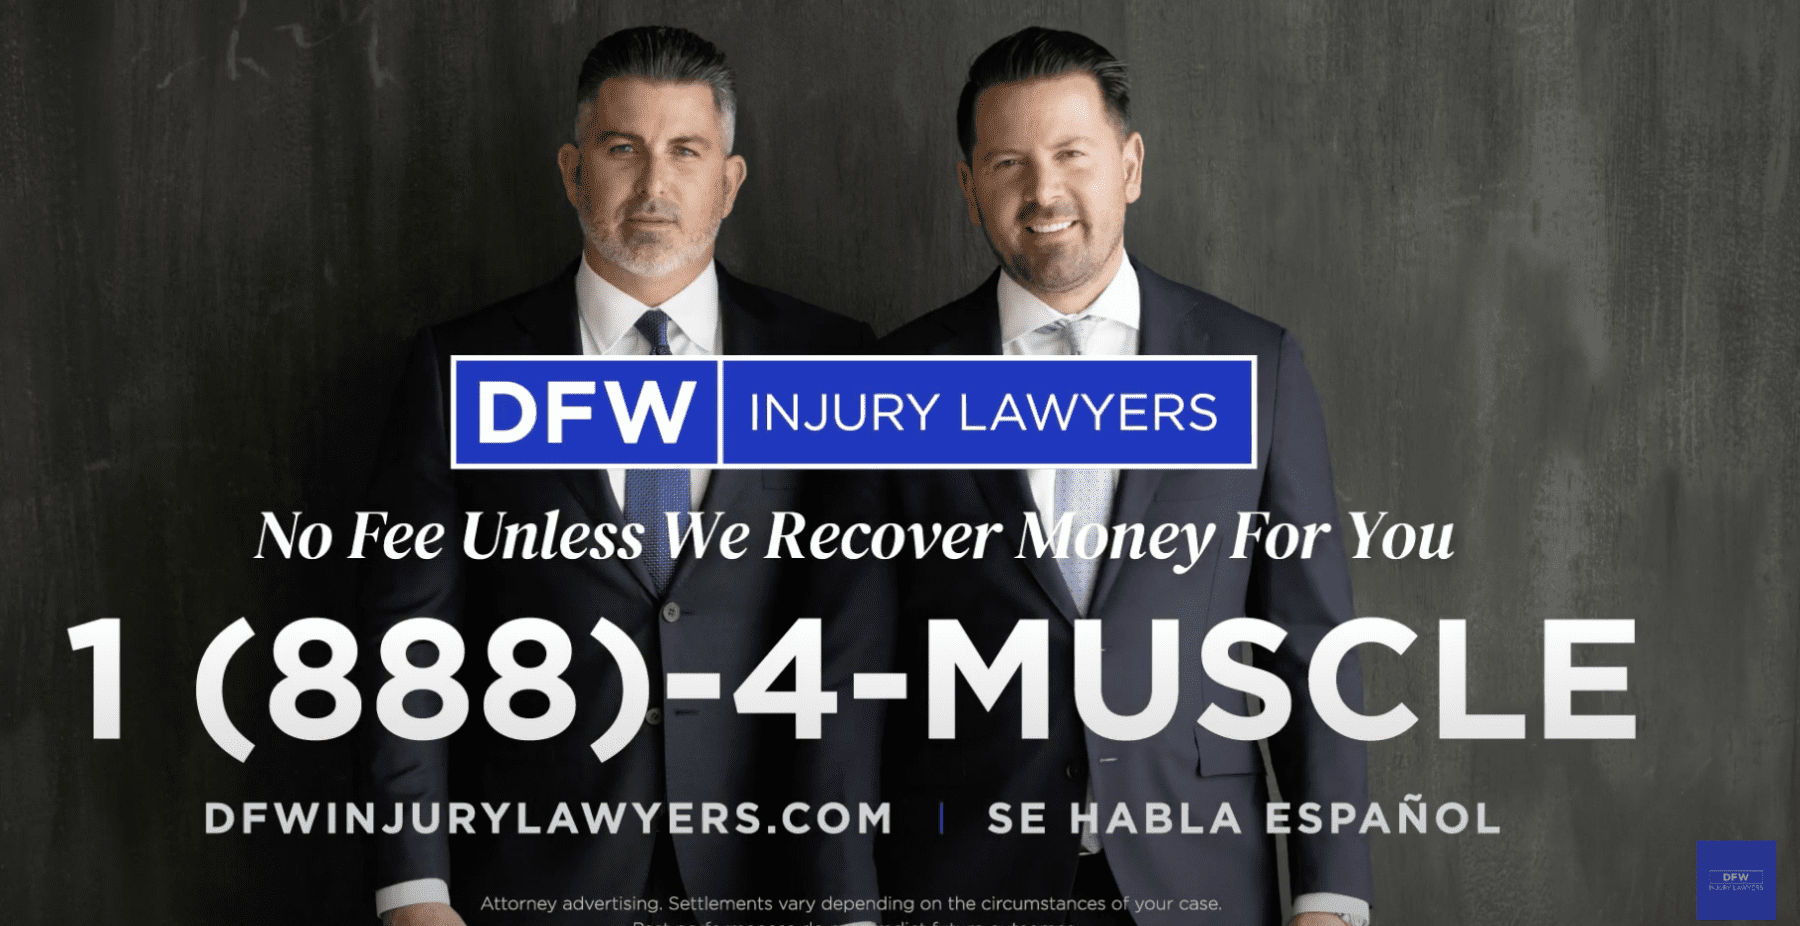 Thumbnail: DFW Injury Lawyers Commercial | Get The Compensation You Deserve